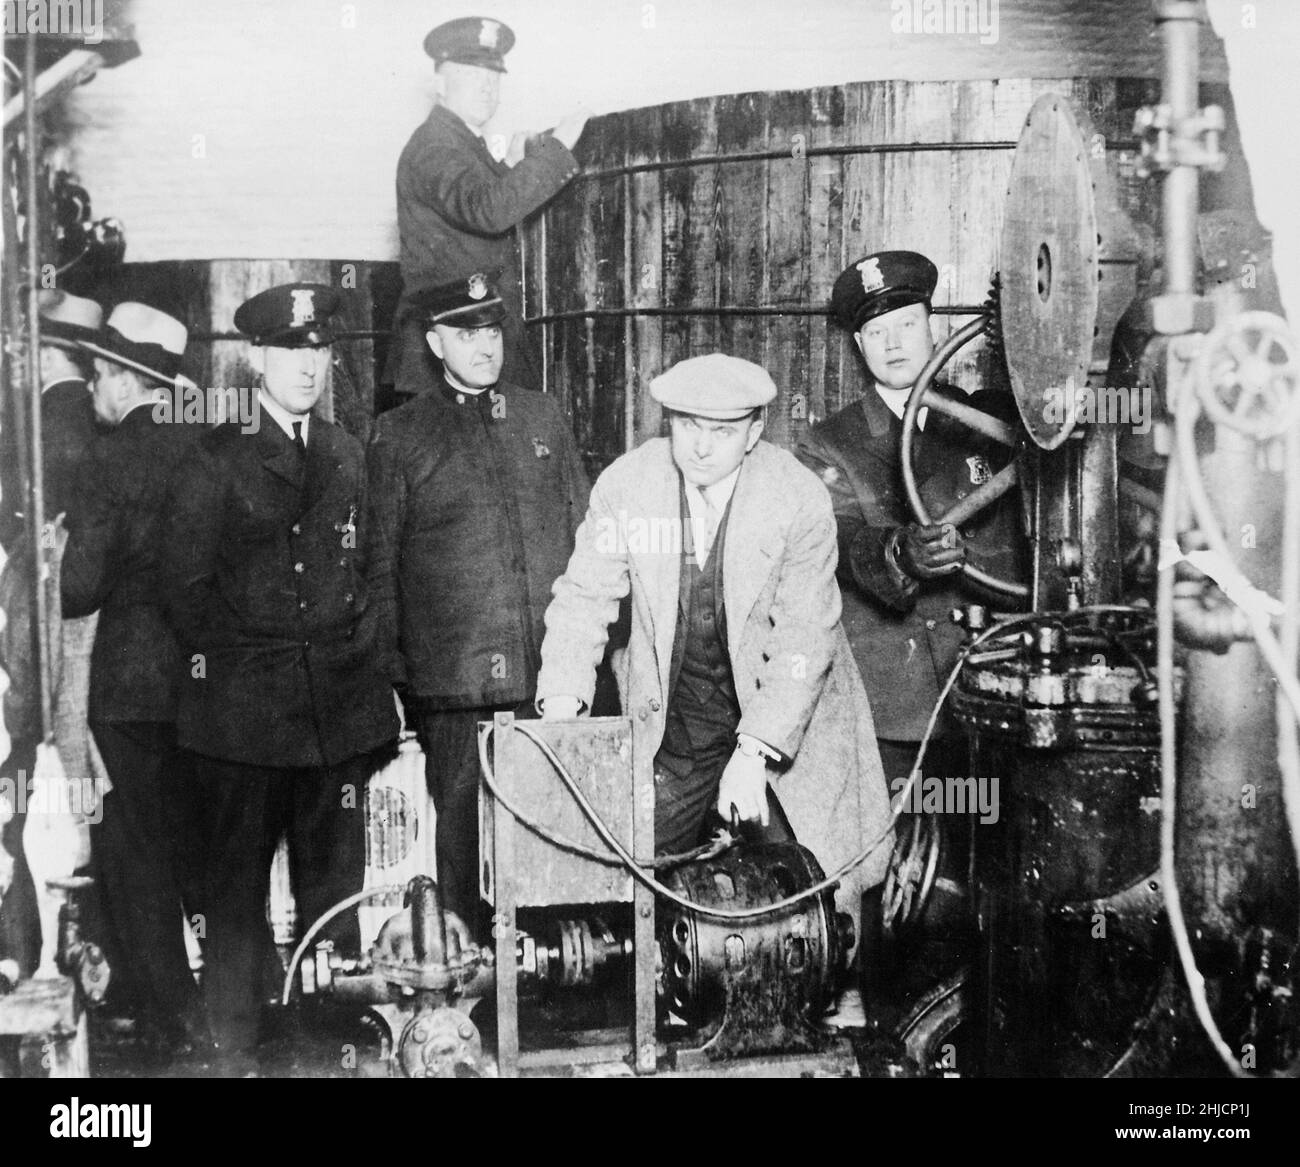 Detroit police inspecting equipment found in a clandestine underground brewery during the prohibition era, circa 1920s. Stock Photo